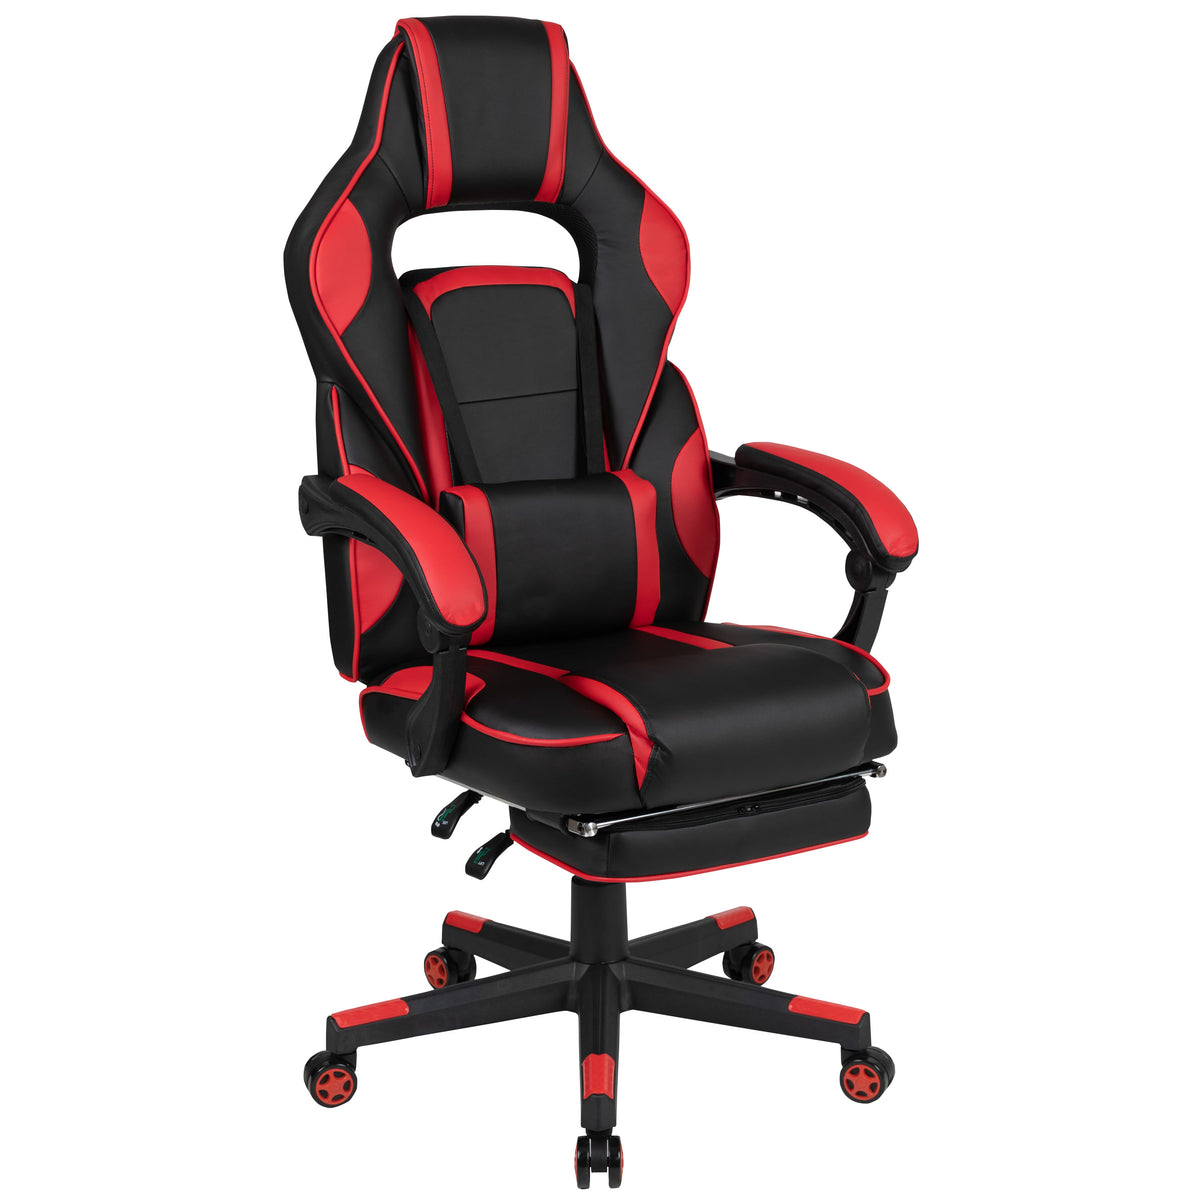 Red |#| Gaming Bundle-Cup/Headphone Desk & Red Reclining Footrest Chair